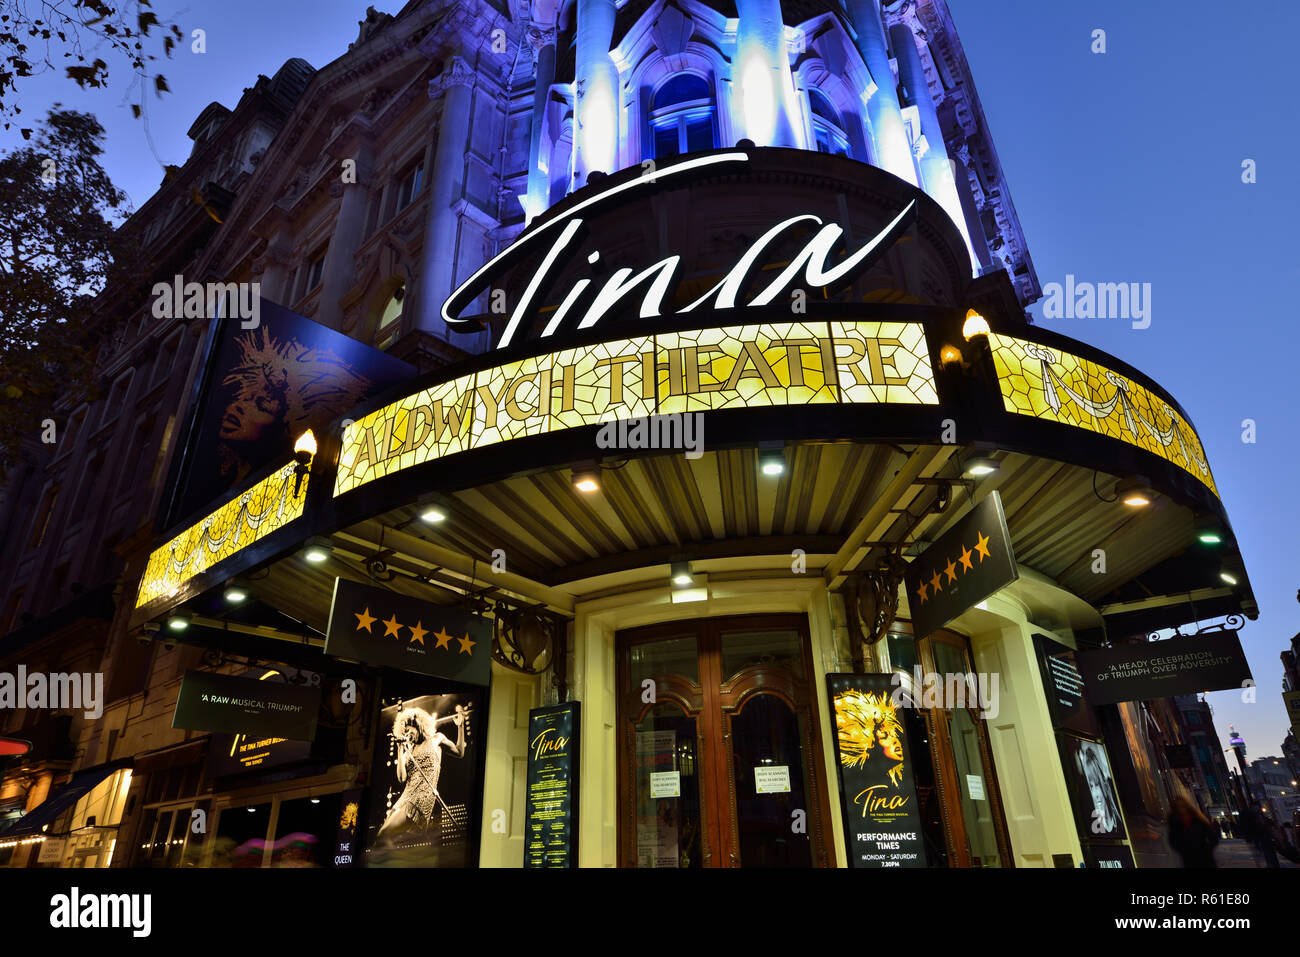 Aldwych Theatre showing Tina musical show, Aldwych, Westend,  City of Westminster, London, United Kingdom Stock Photo